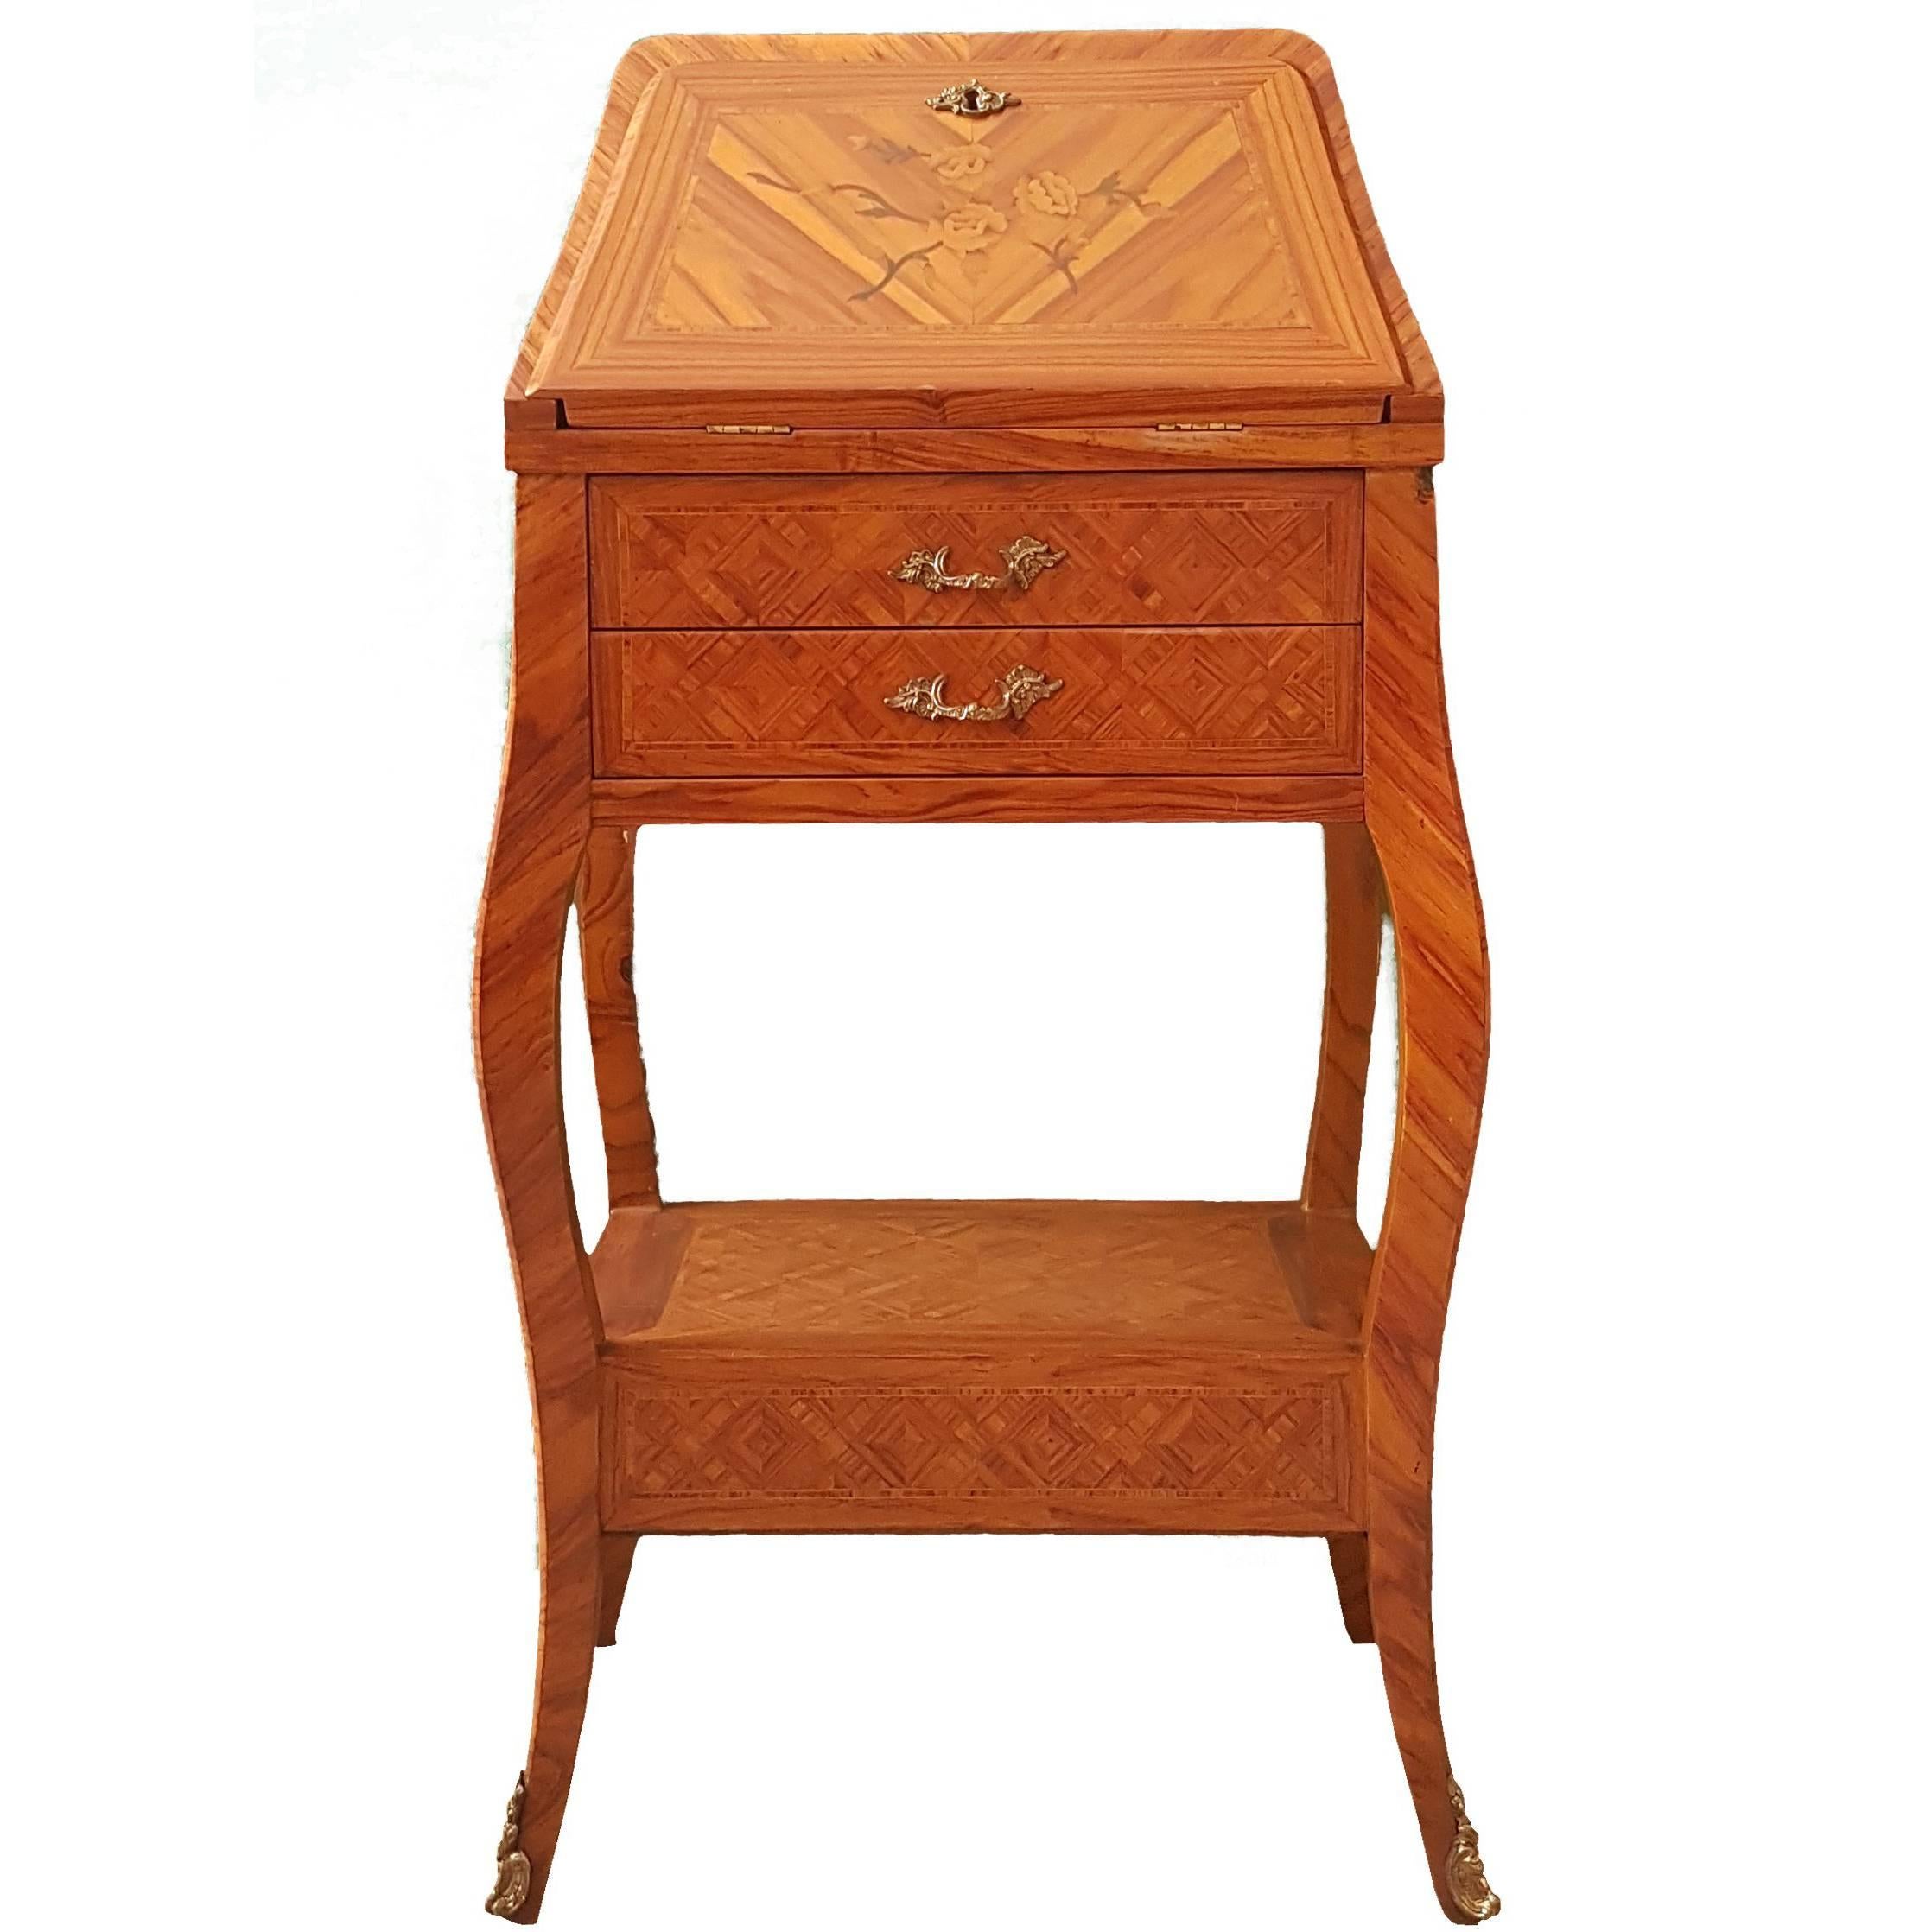 Small Wooden Side Table, Second Half of the 20th Century